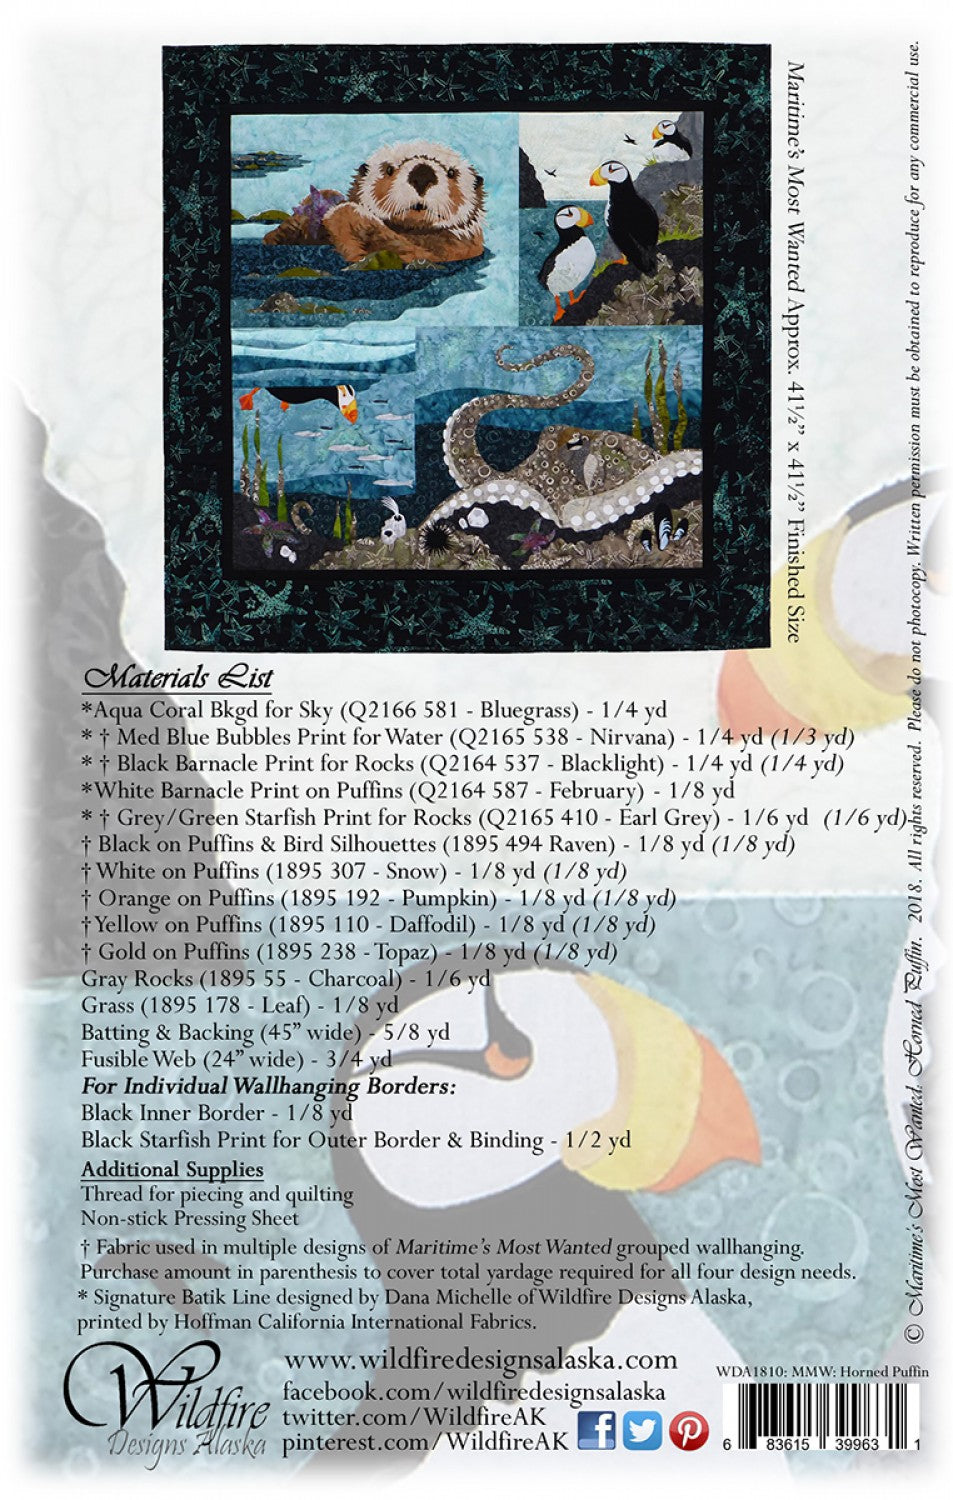 Wildfire Designs Alaska Maritime's Most Wanted Horned Puffin Applique Quilt Pattern Back Cover